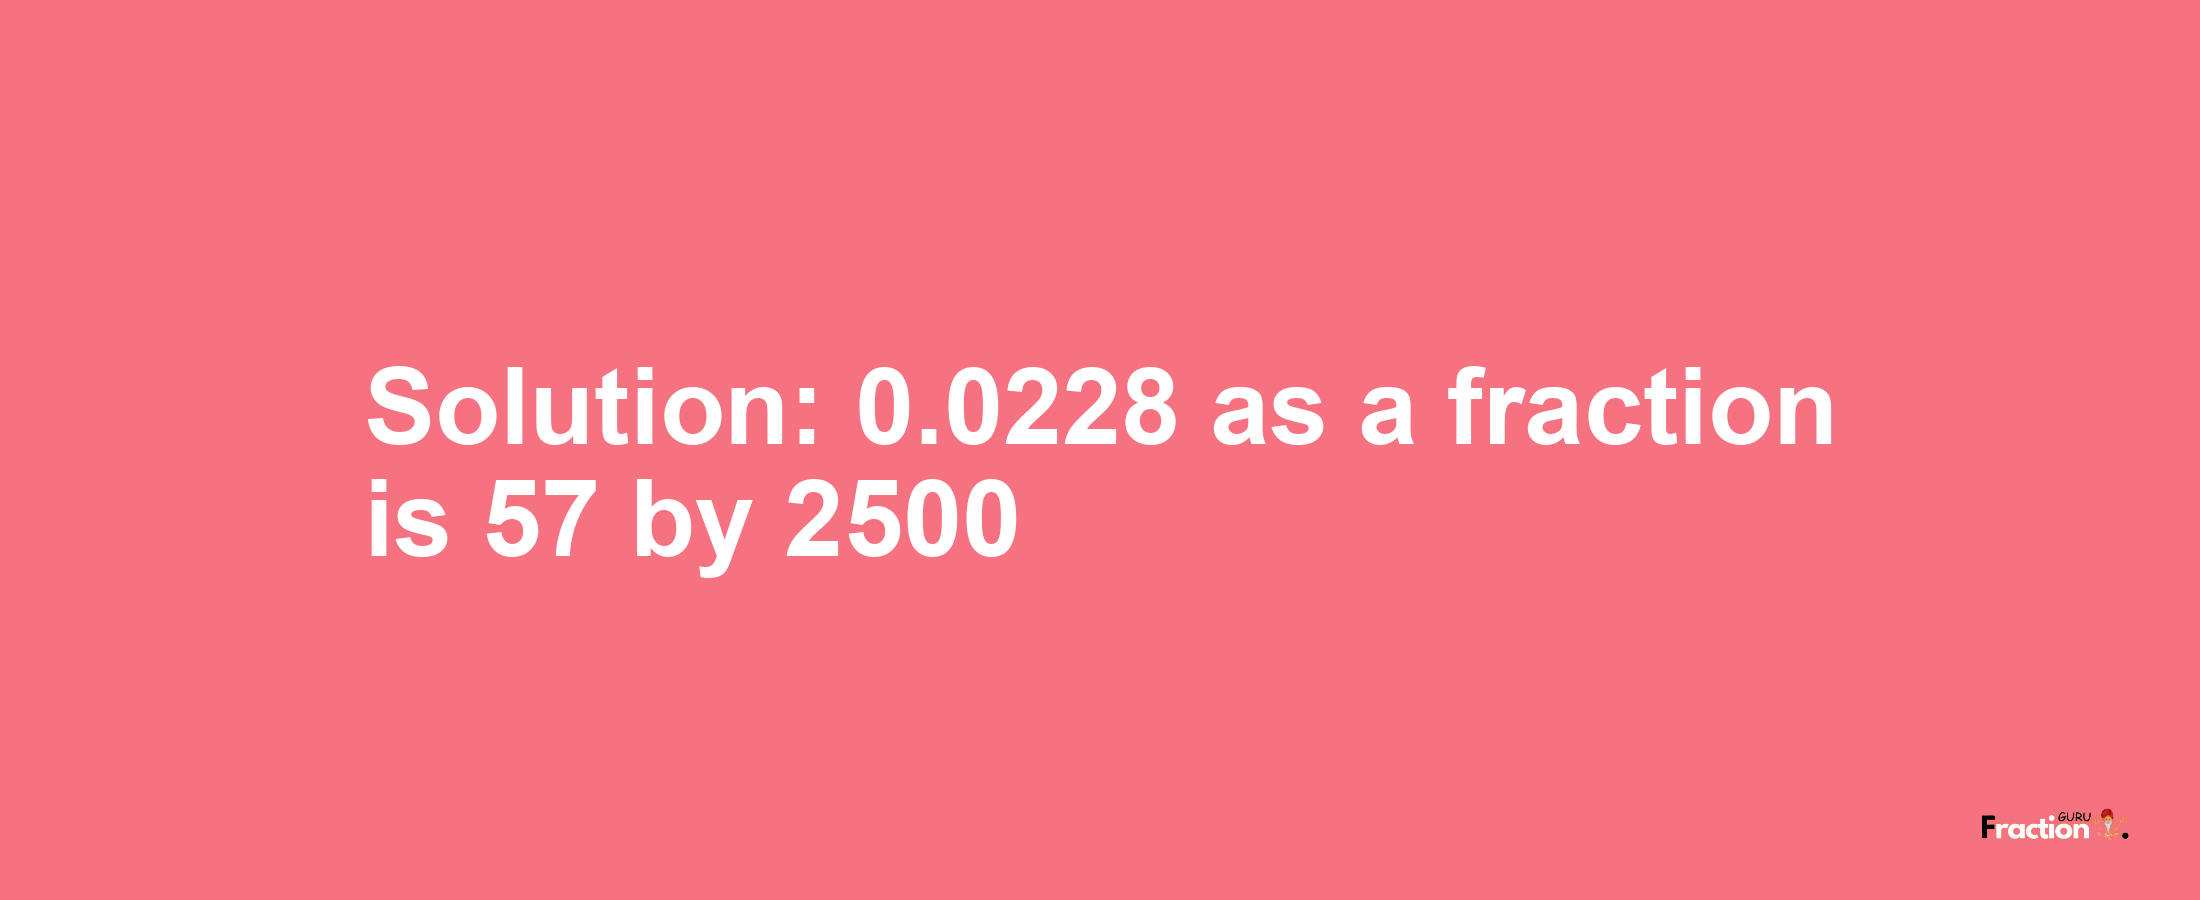 Solution:0.0228 as a fraction is 57/2500